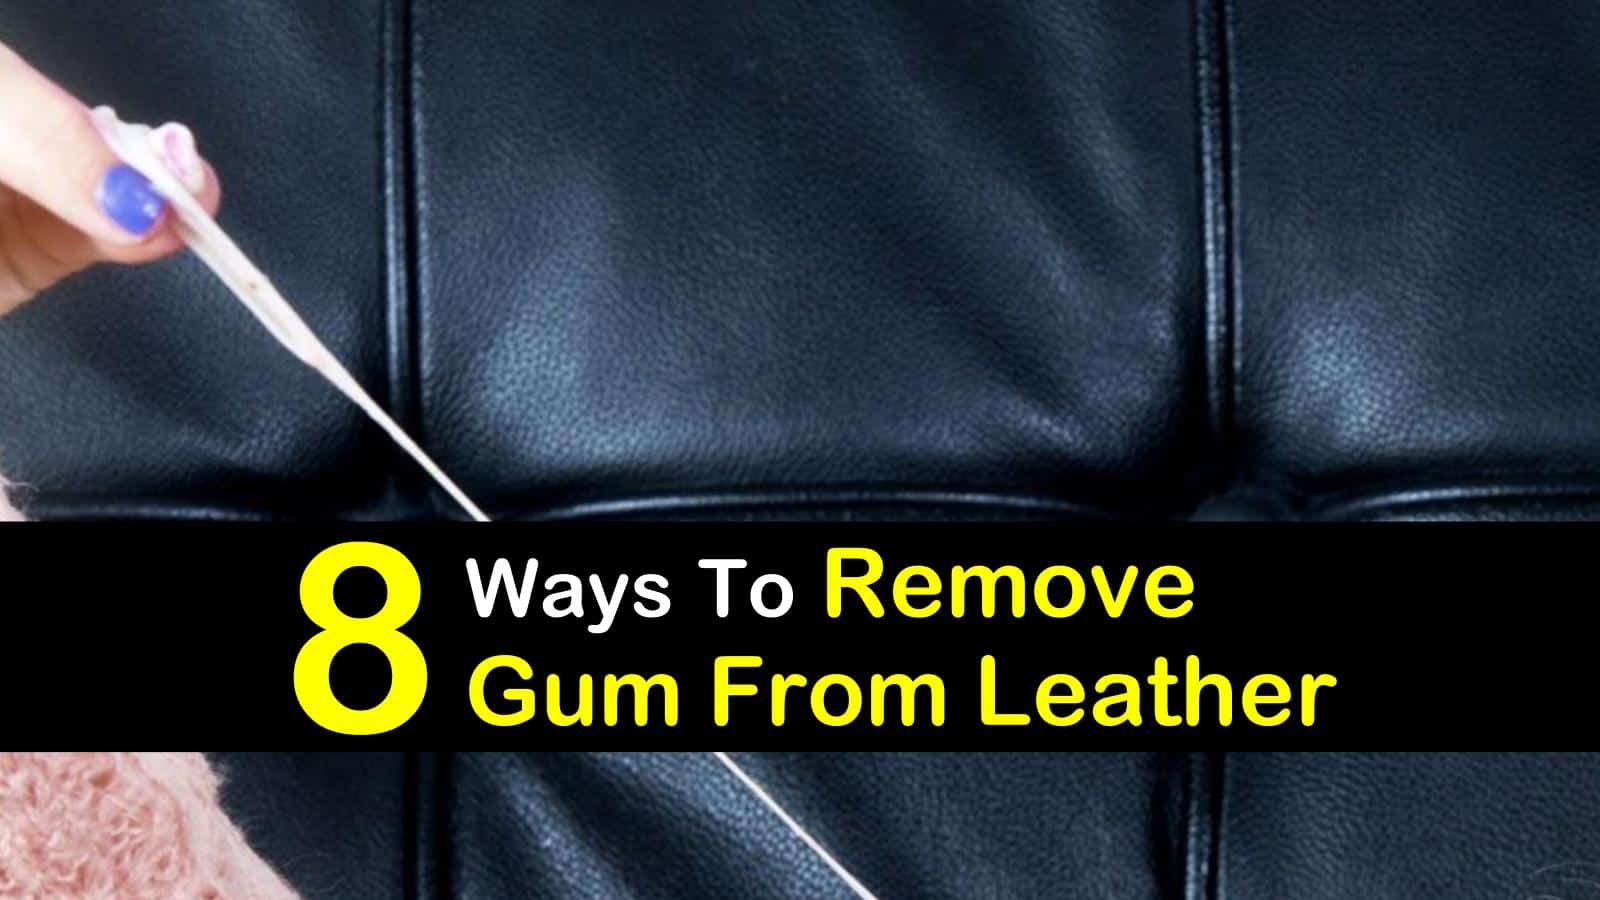 how to remove gum from leather titleimg1